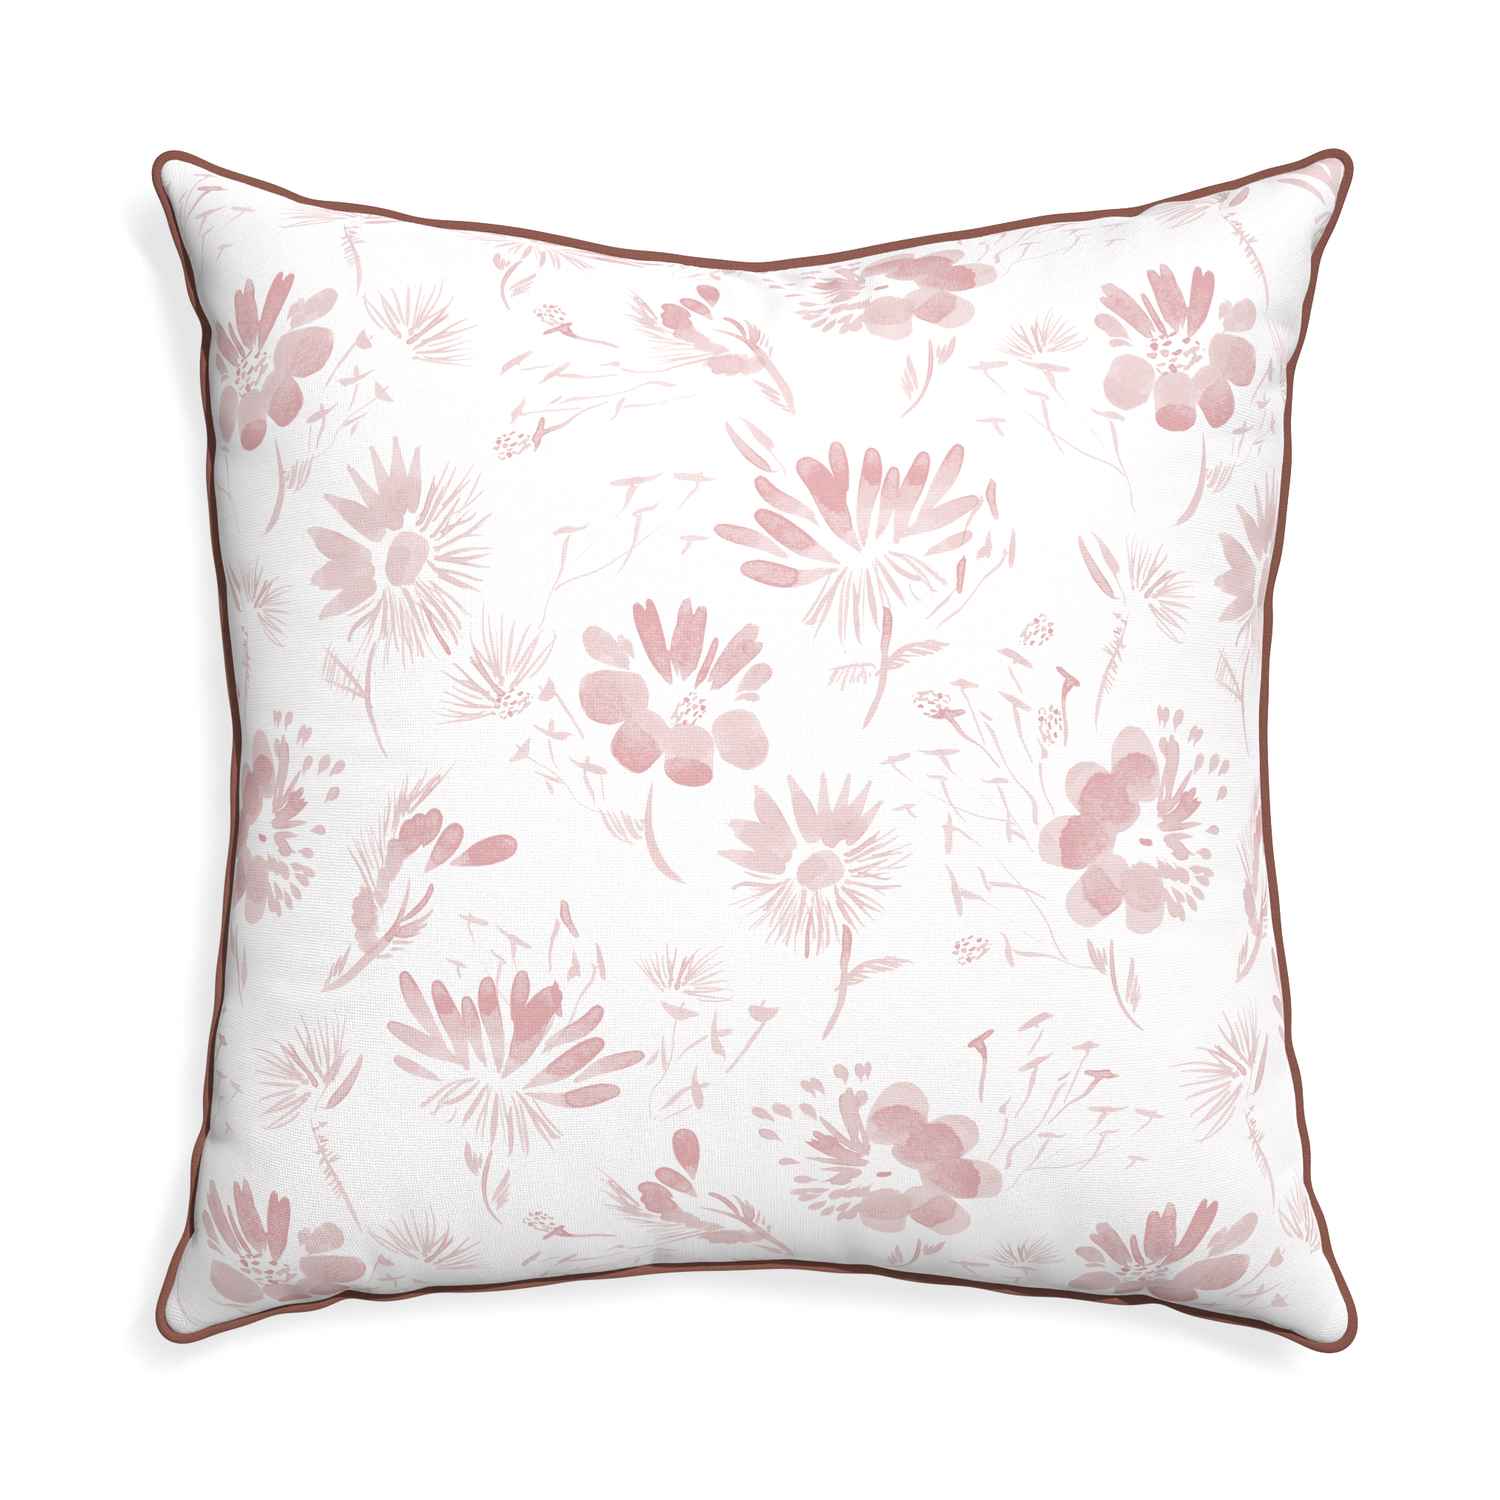 Euro-sham blake custom pink floralpillow with w piping on white background